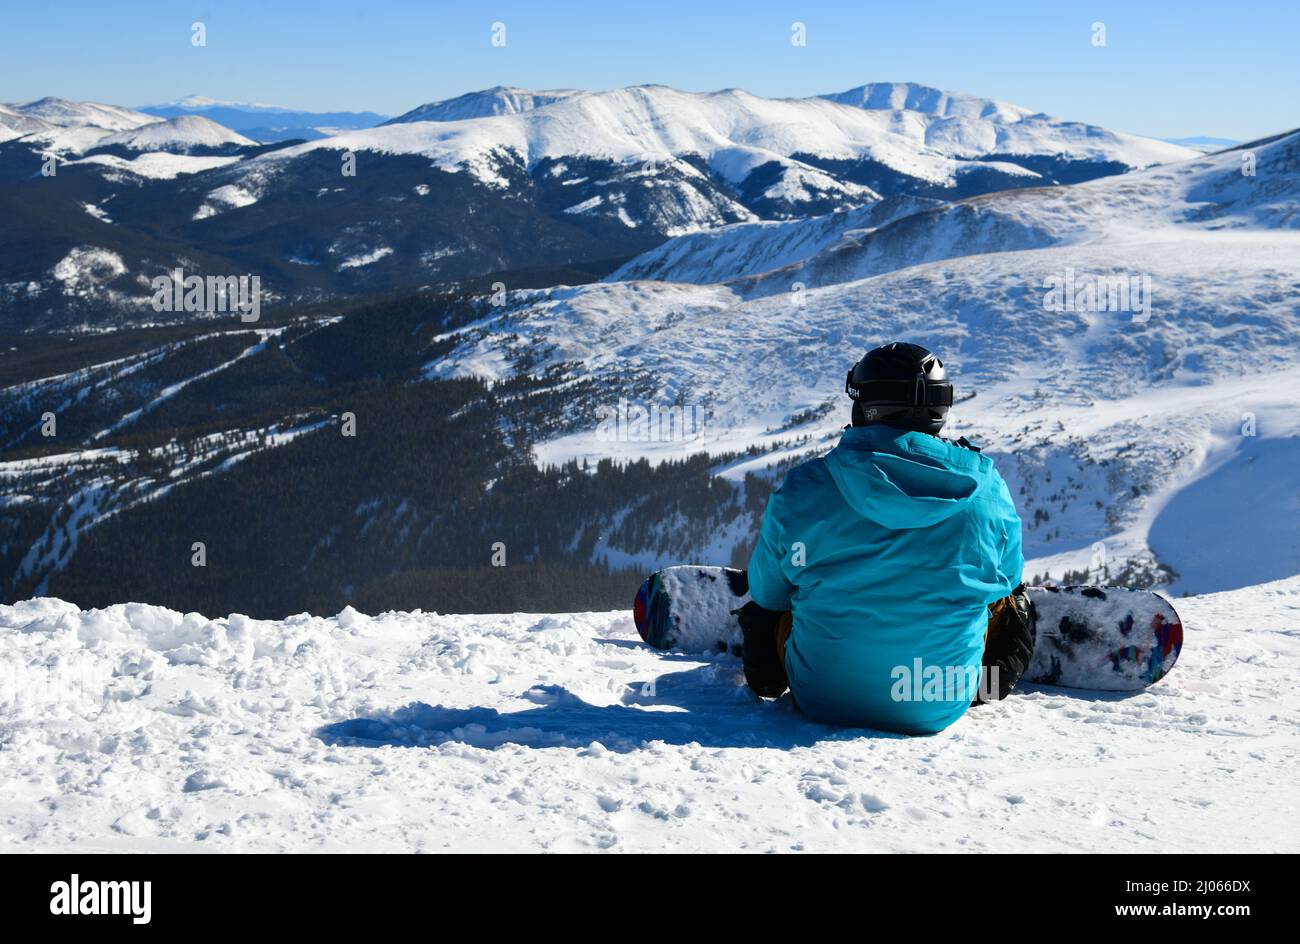 Snowboarder sitting on the top of Peak 8 at the Breckenridge Ski Resort in Colorado. Active lifestyle, extreme winter sports. Stock Photo